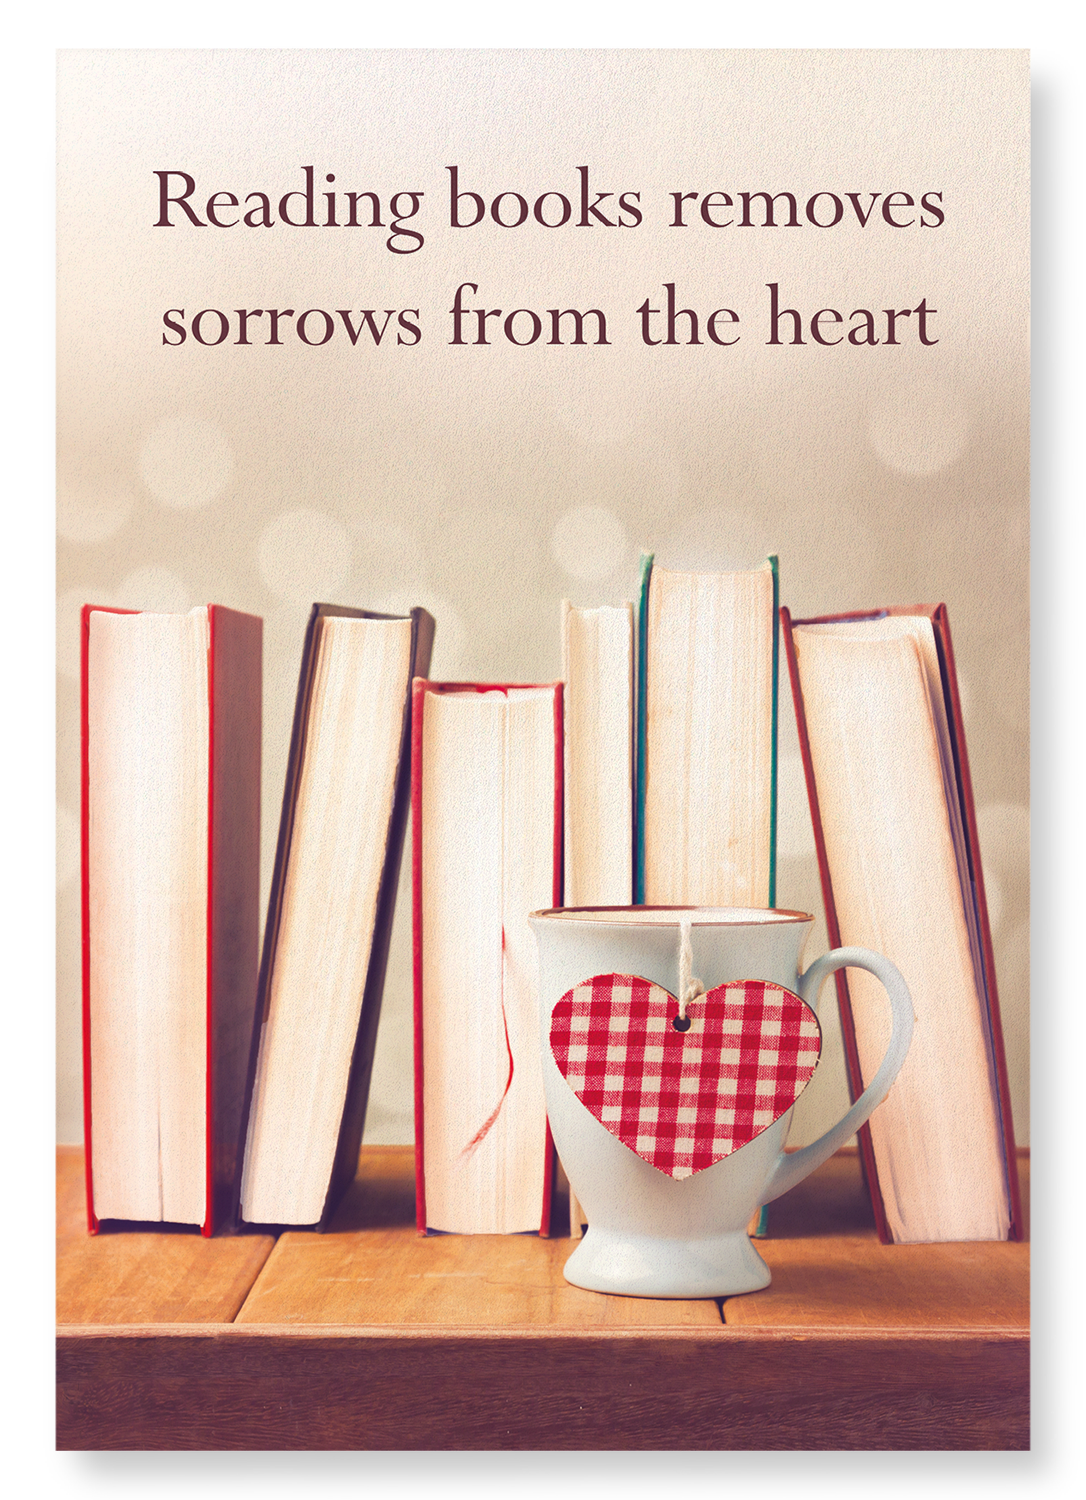 READING FOR THE HEART